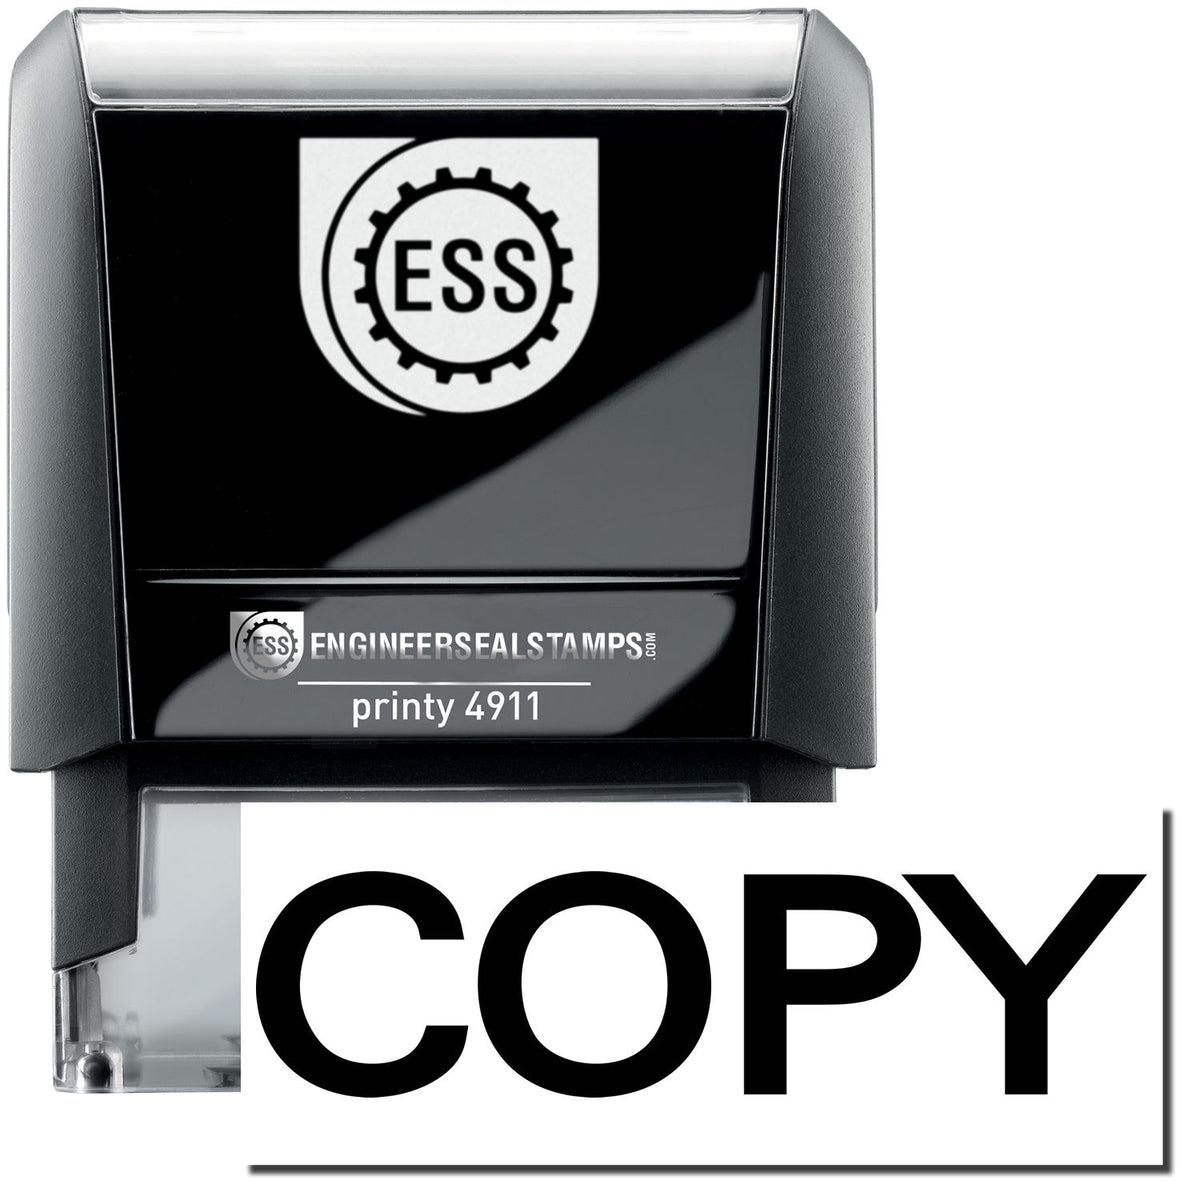 A self-inking stamp with a stamped image showing how the text &quot;COPY&quot; in bold font is displayed after stamping.